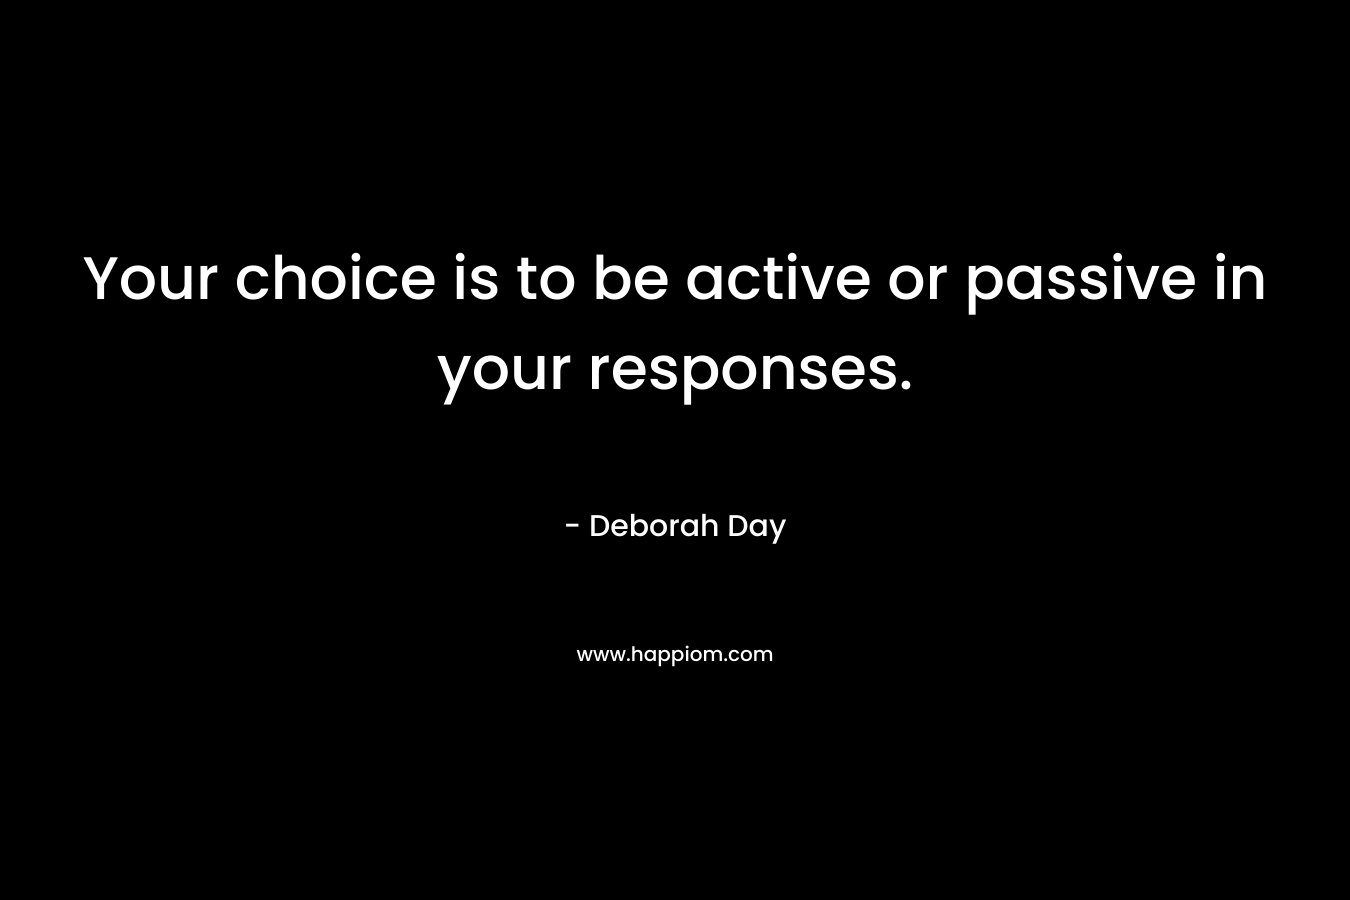 Your choice is to be active or passive in your responses. – Deborah Day